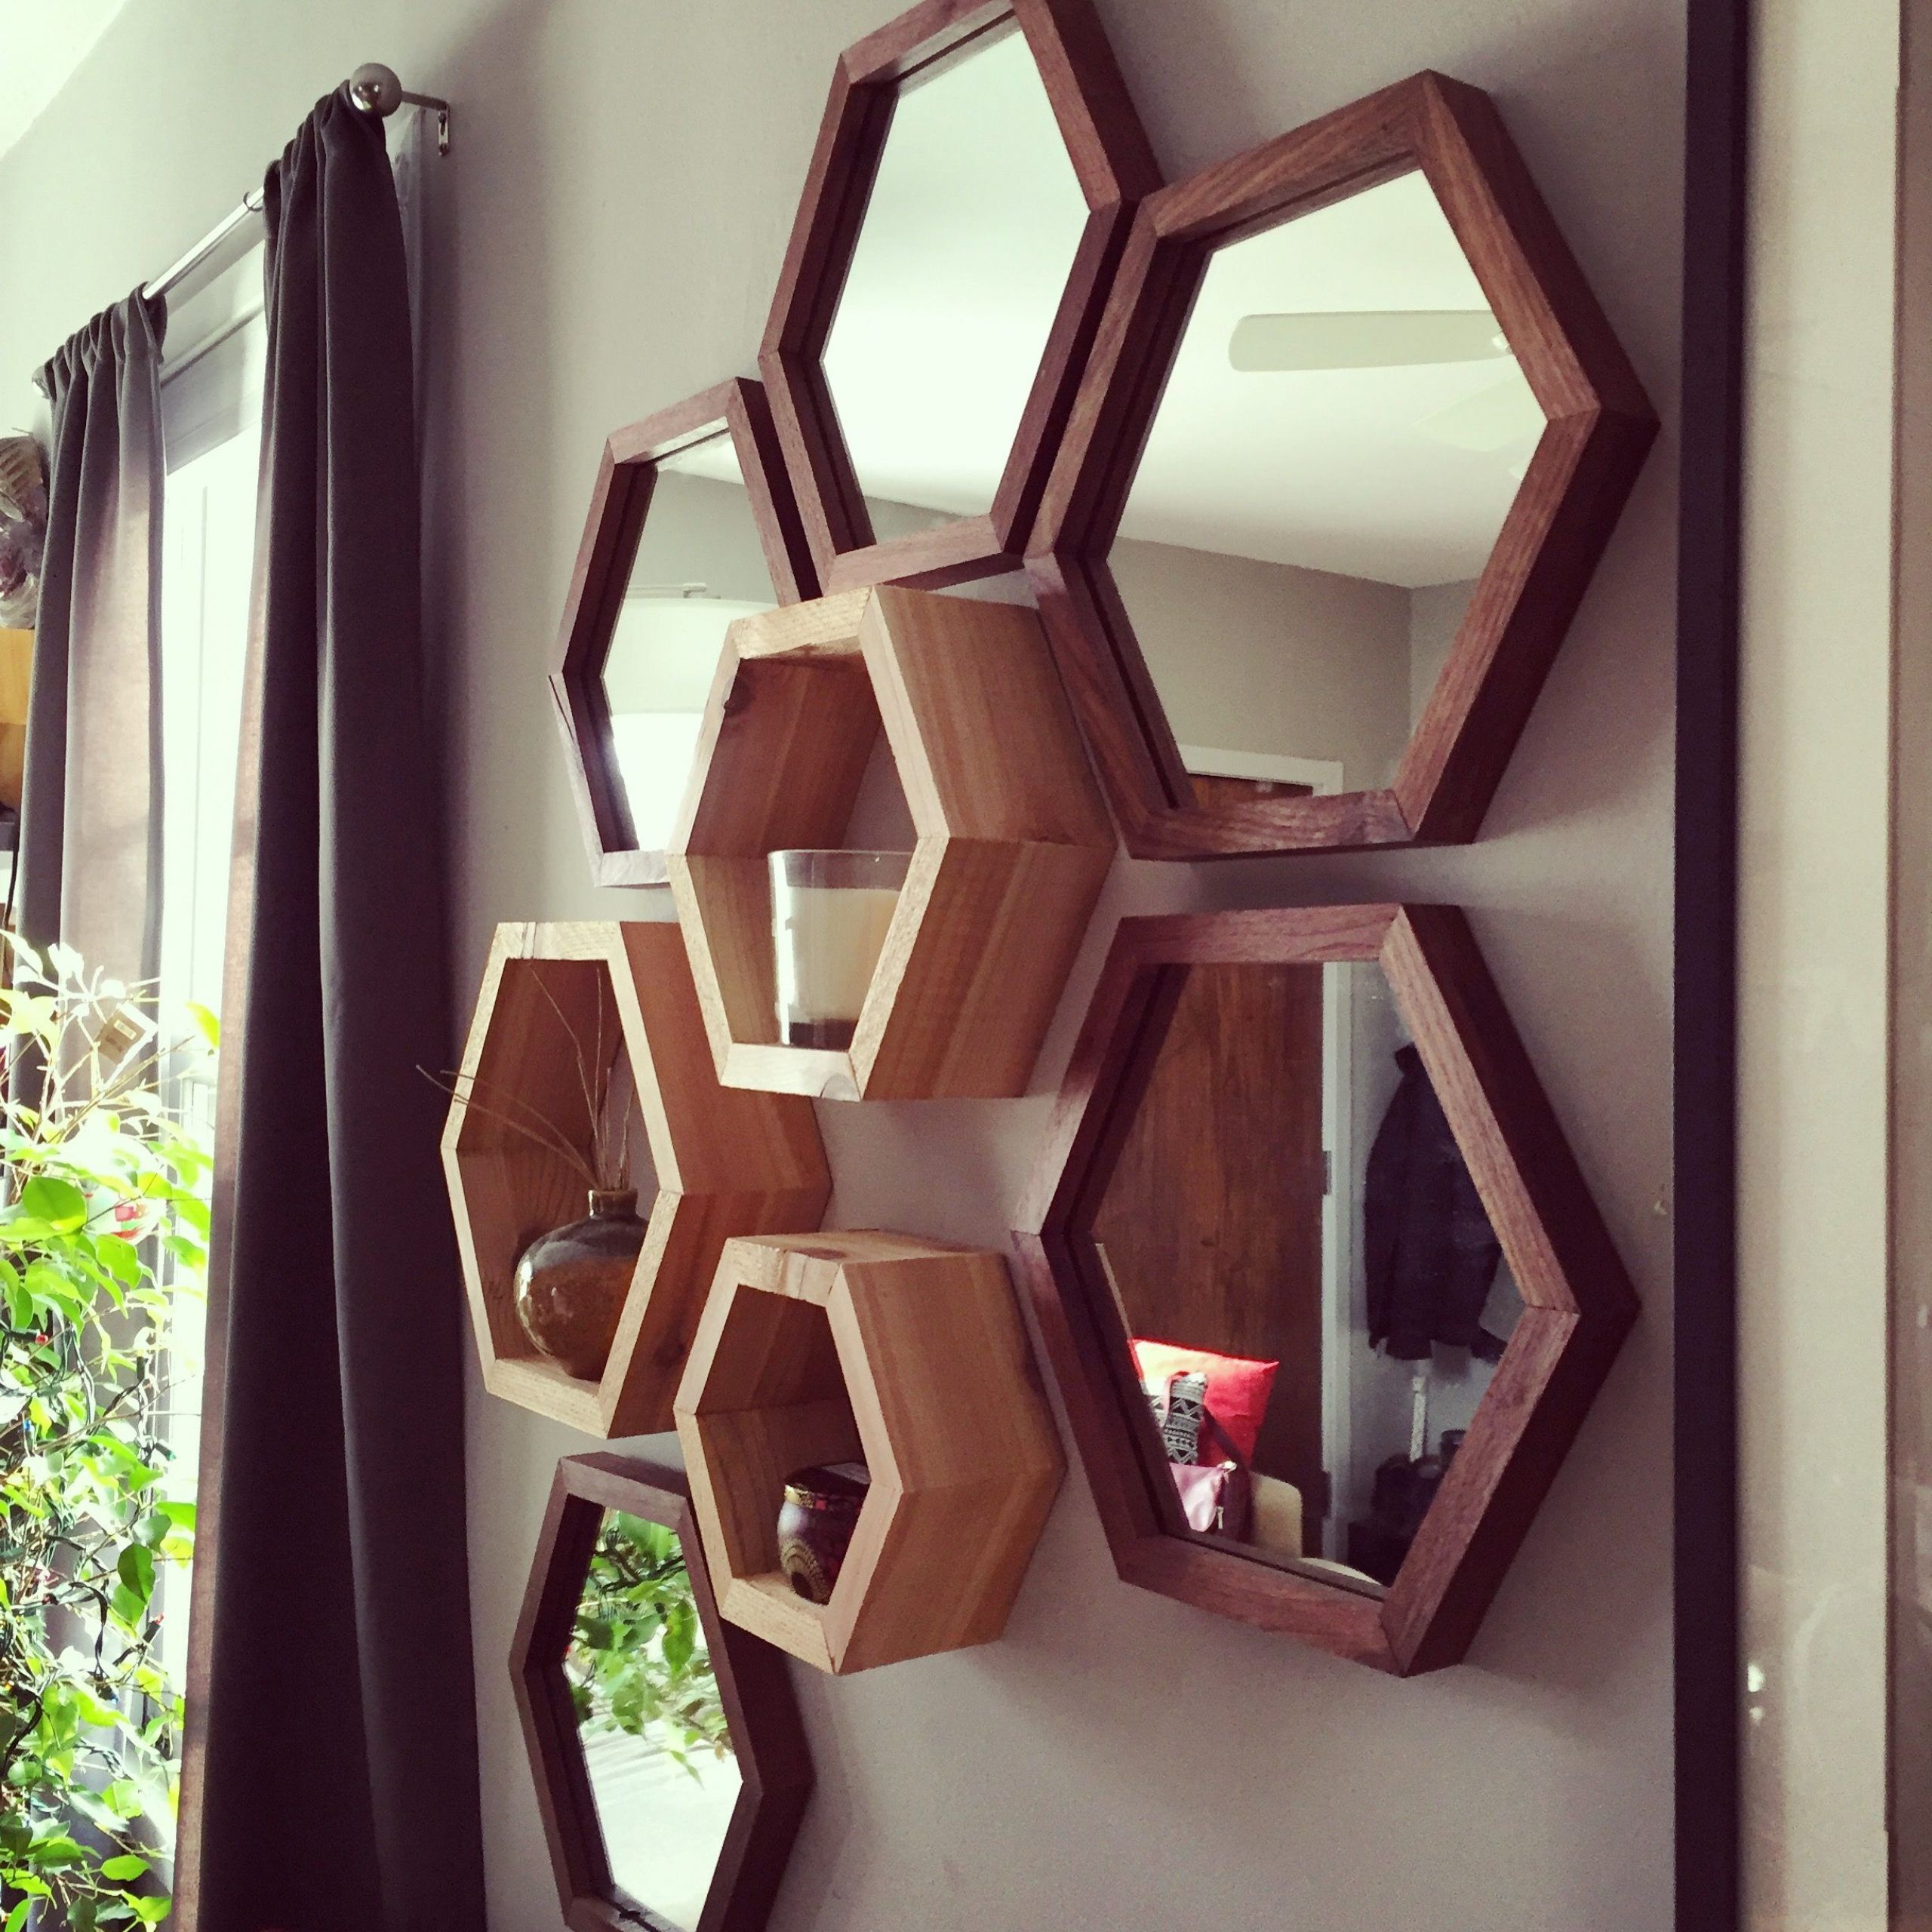 Set Of 3 Hexagon Shelves $46 Hexagon Mirror $40 Available Pertaining To Most Up To Date Hexagons Wall Art (View 1 of 20)